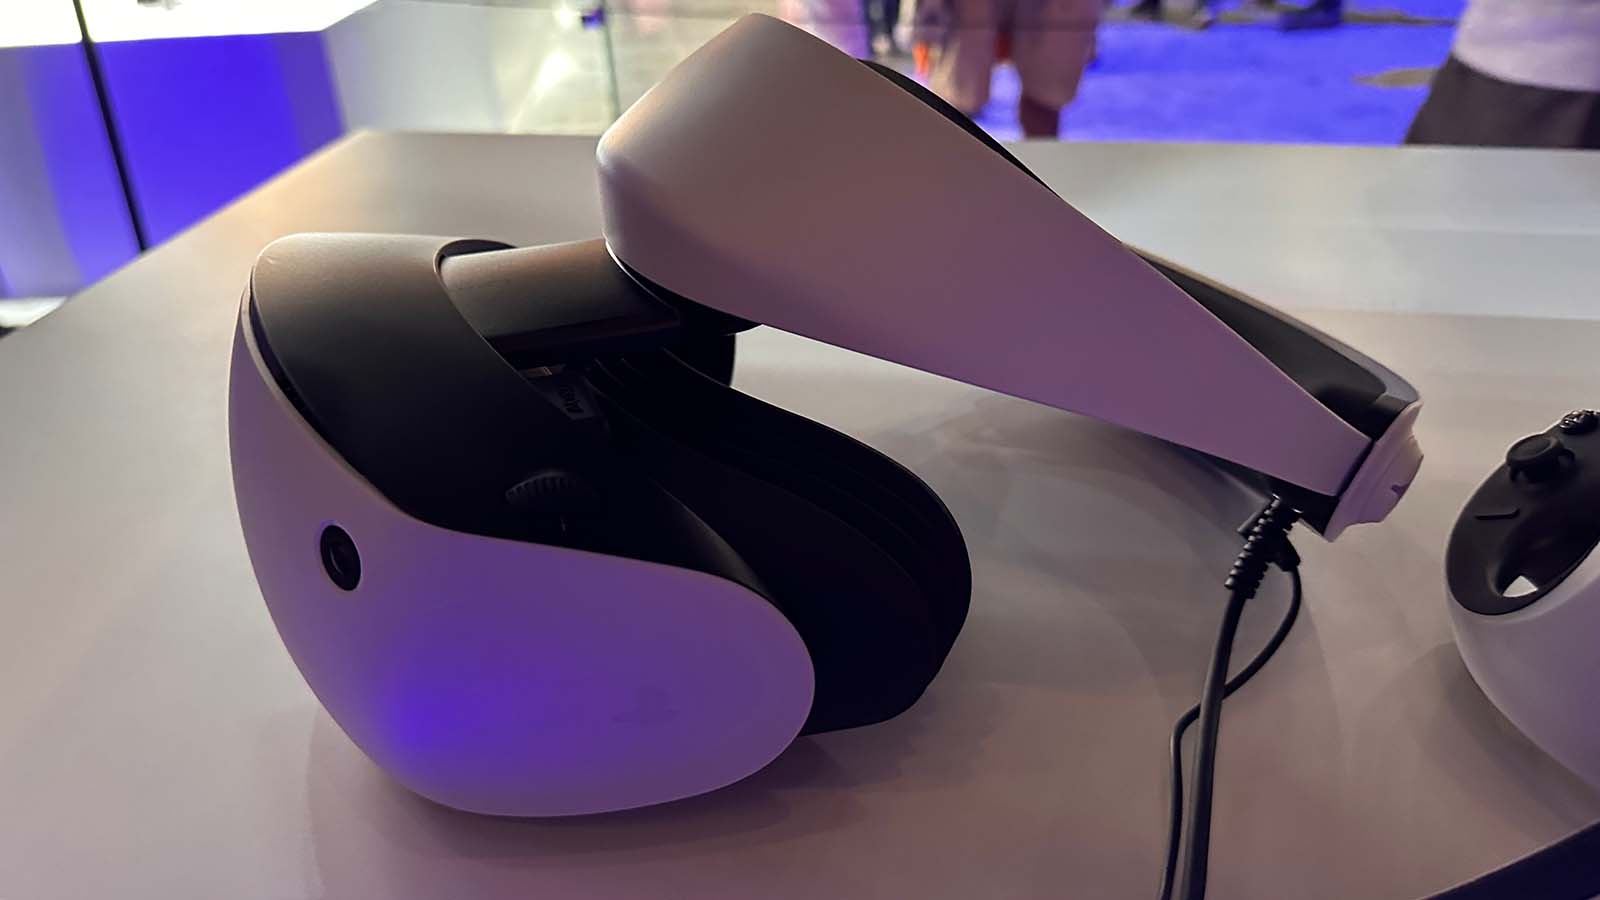 PSVR 2 Hands-on: Big Improvements Coming to Sony's Next VR Headset